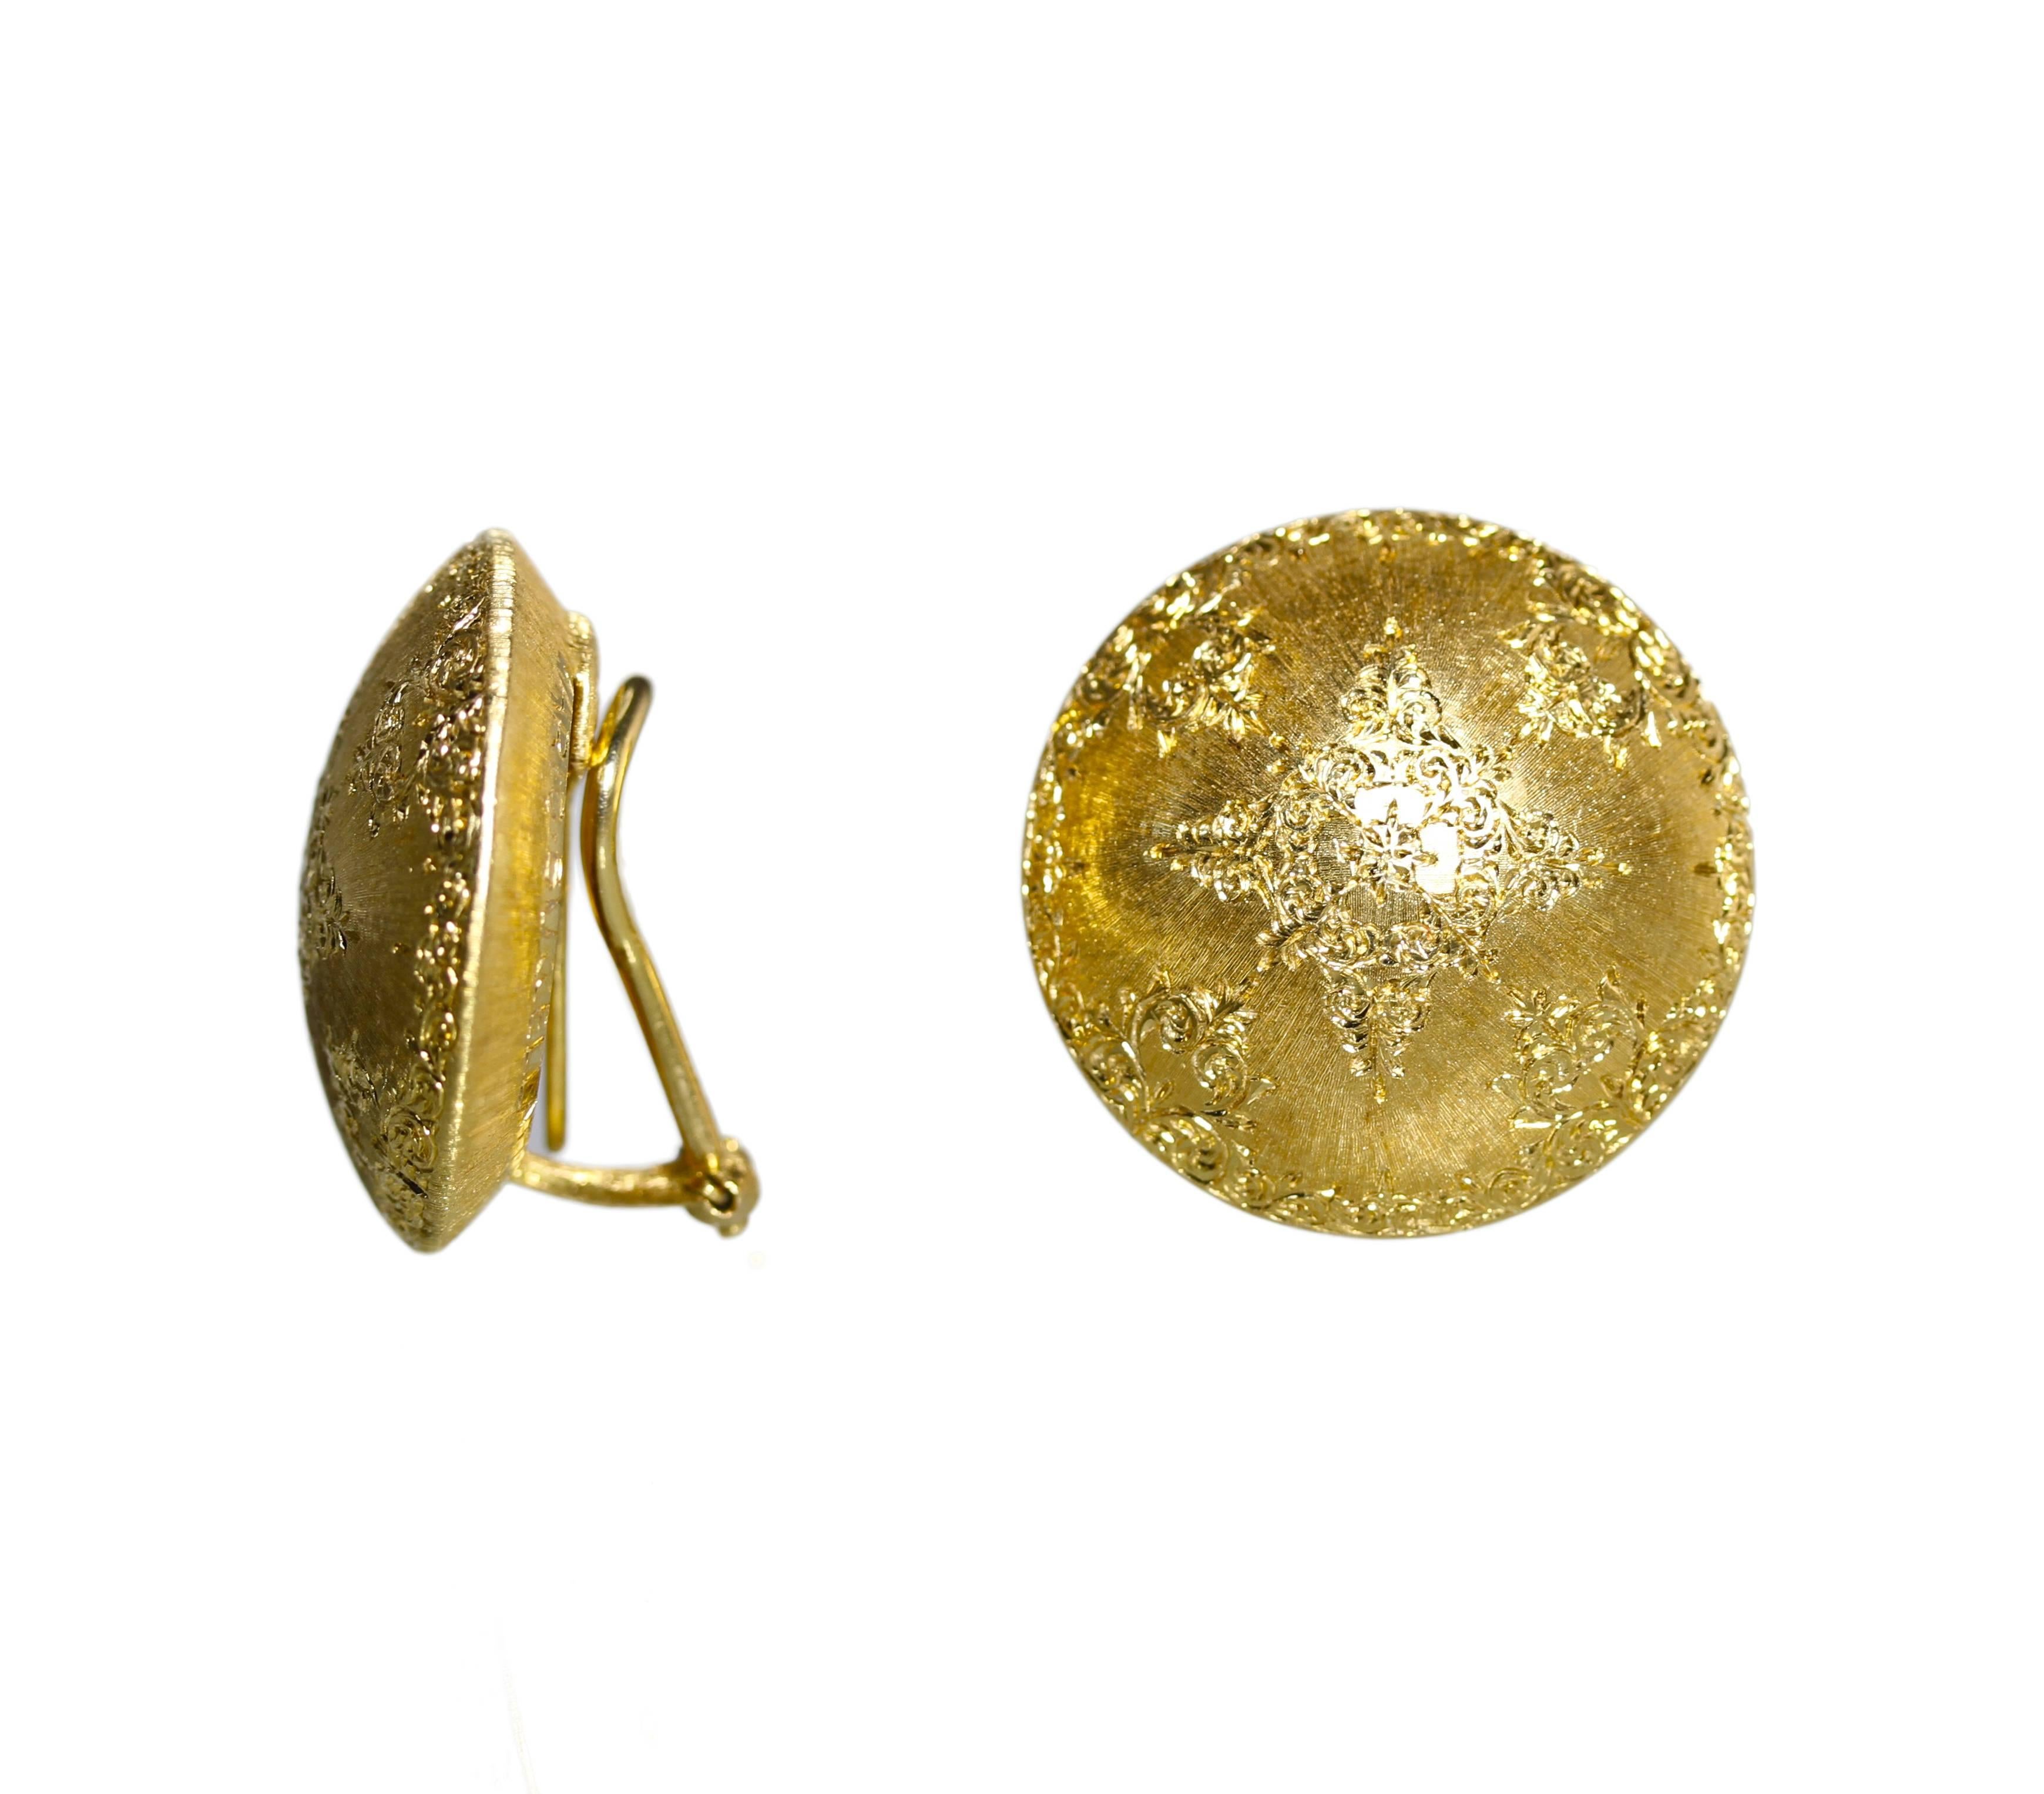 Pair of 18 Karat Gold Earclips by Mario Buccellati, circa 1960
• Signed Mario Buccellati, Italy, stamped 750
• Hand engraved and etched
• Weight 17.0 grams, measuring 1 by 1 inch